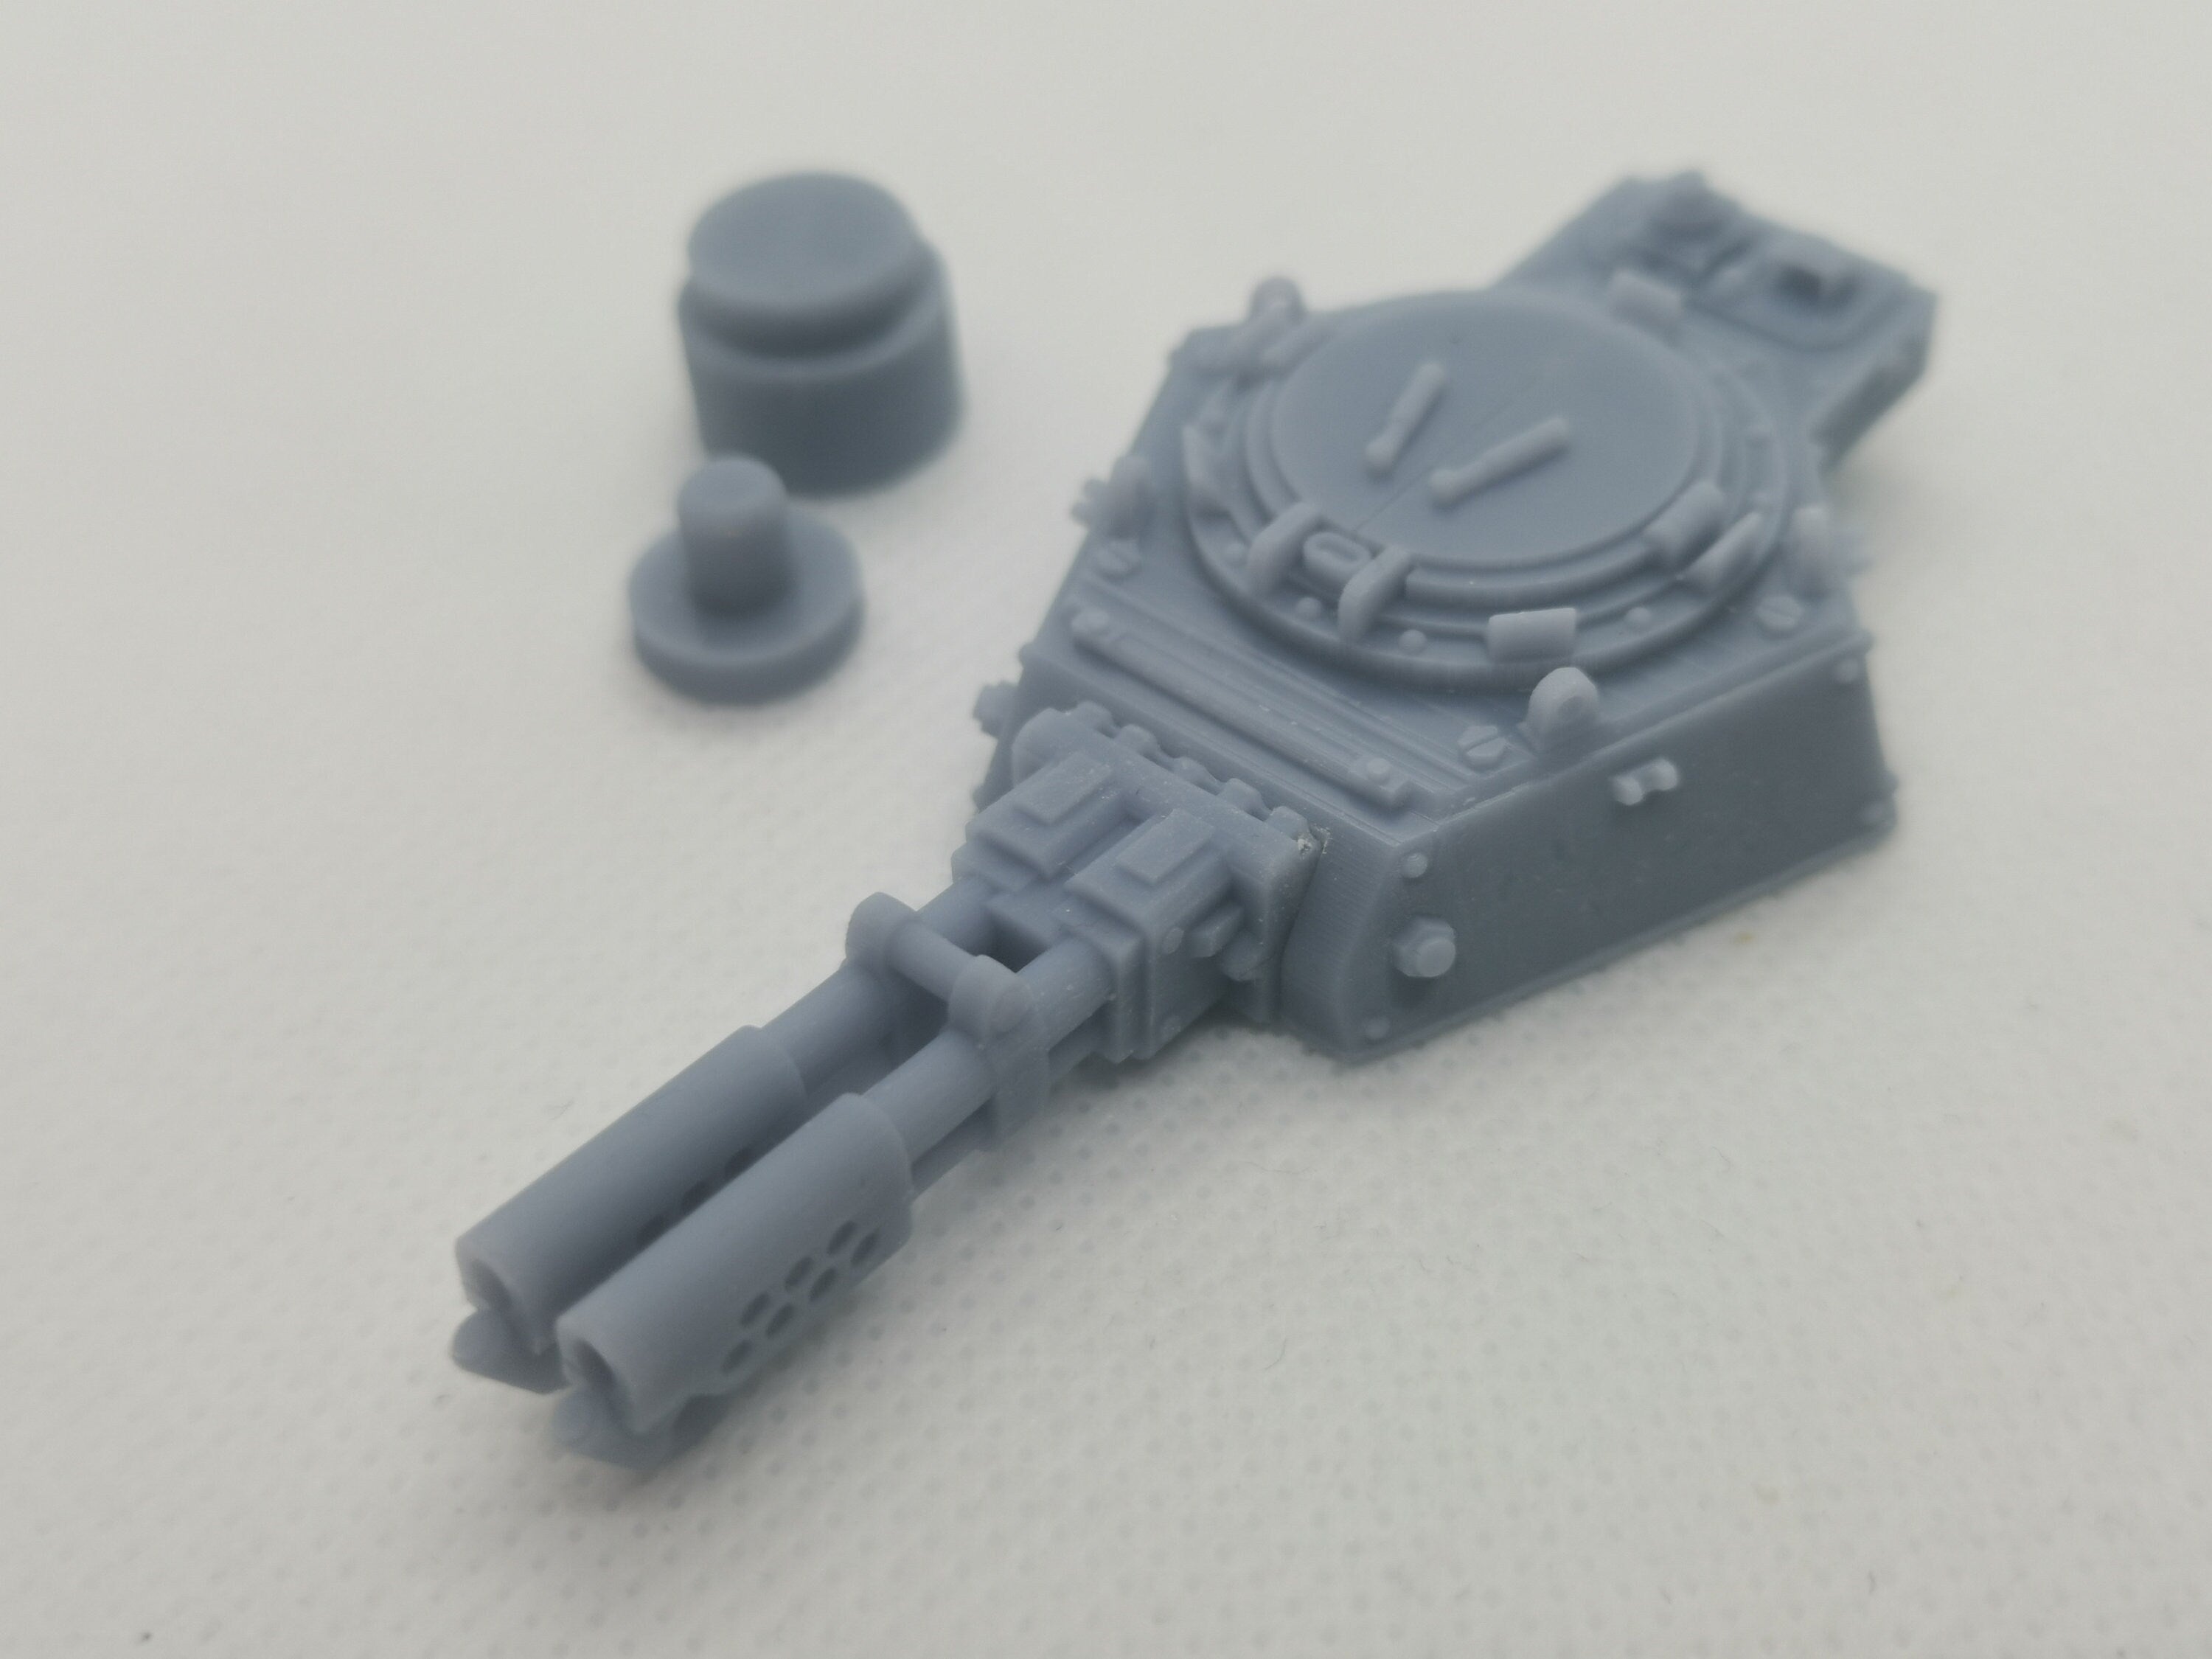 Chimera Turret & Inferno Double Heavy Flamer Cannon Warhammer Compatible